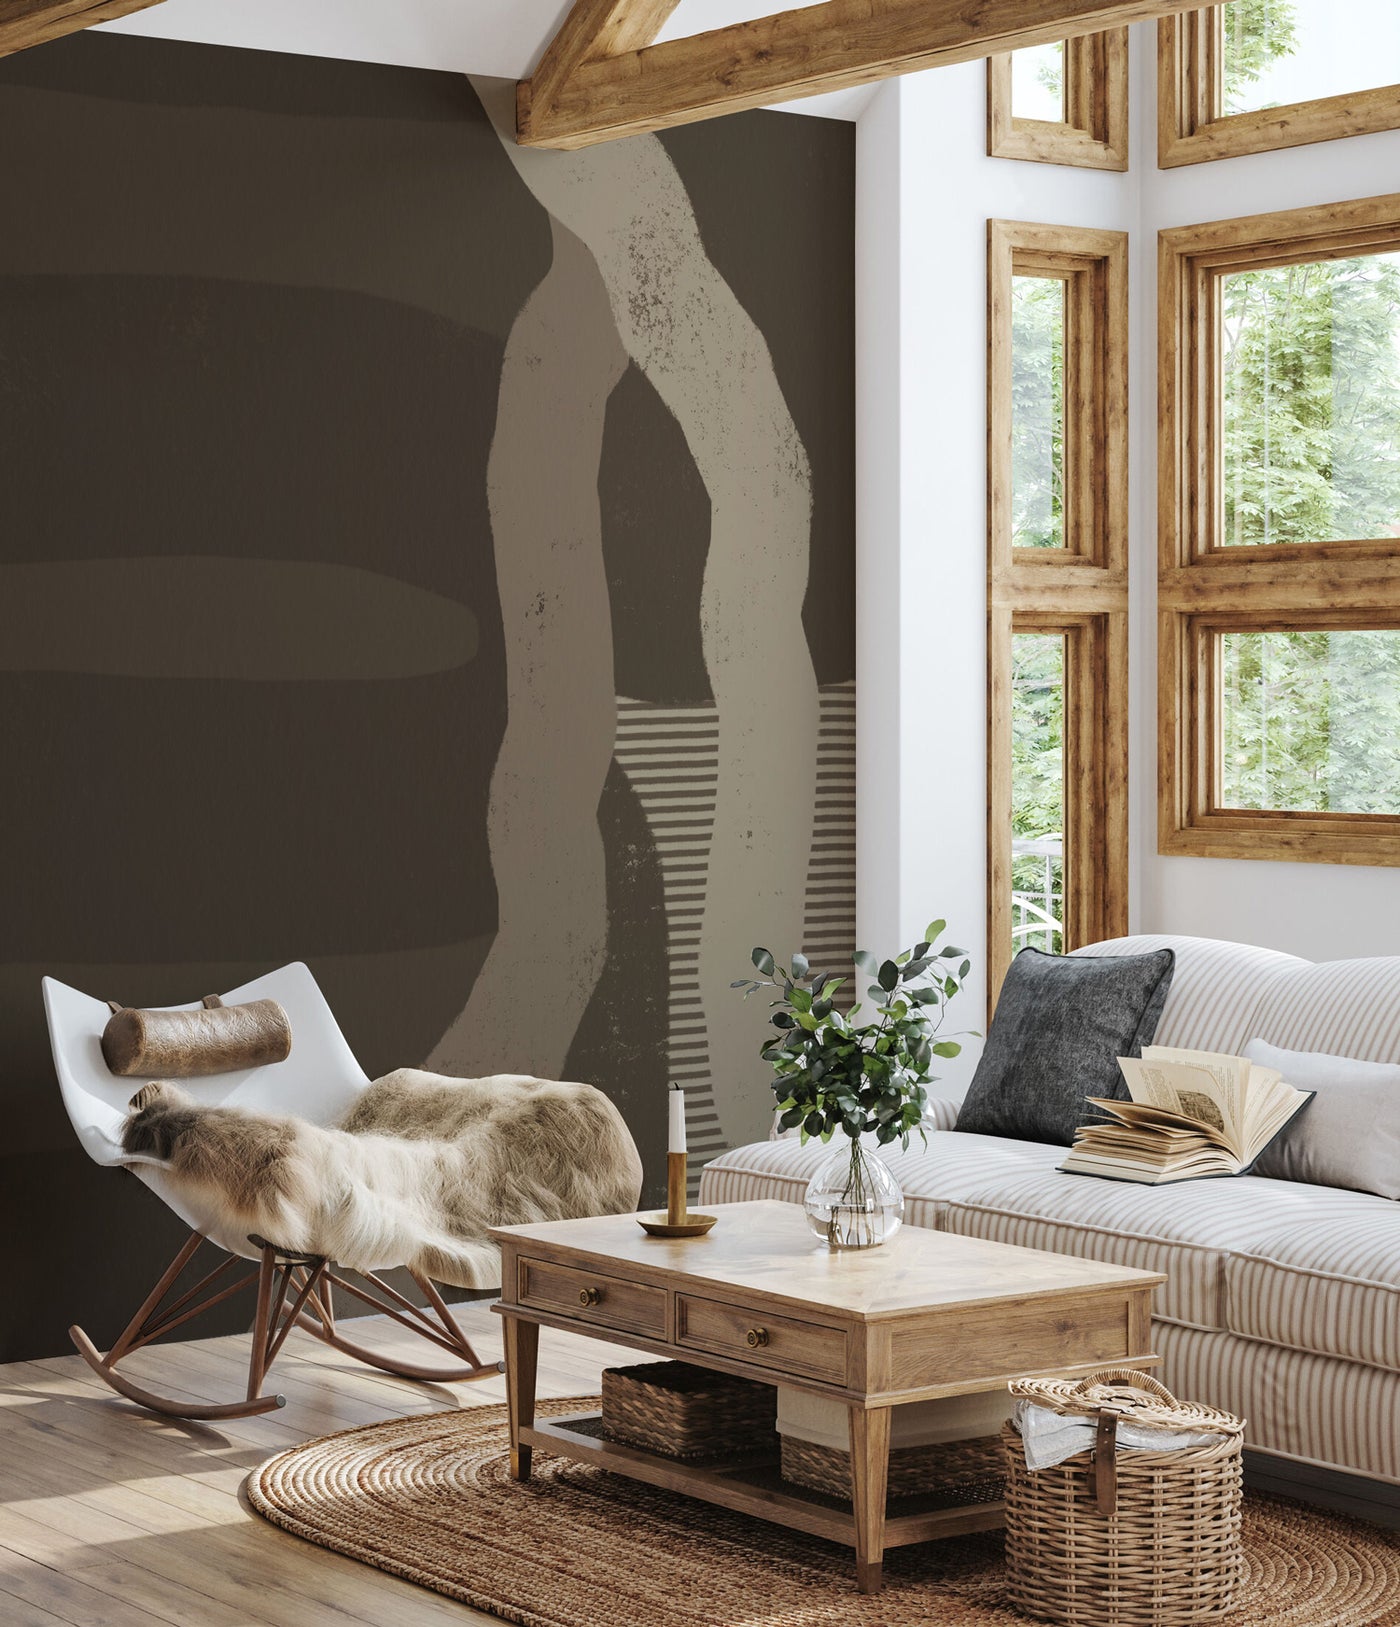 Reverie Abstract Impression Wall Mural